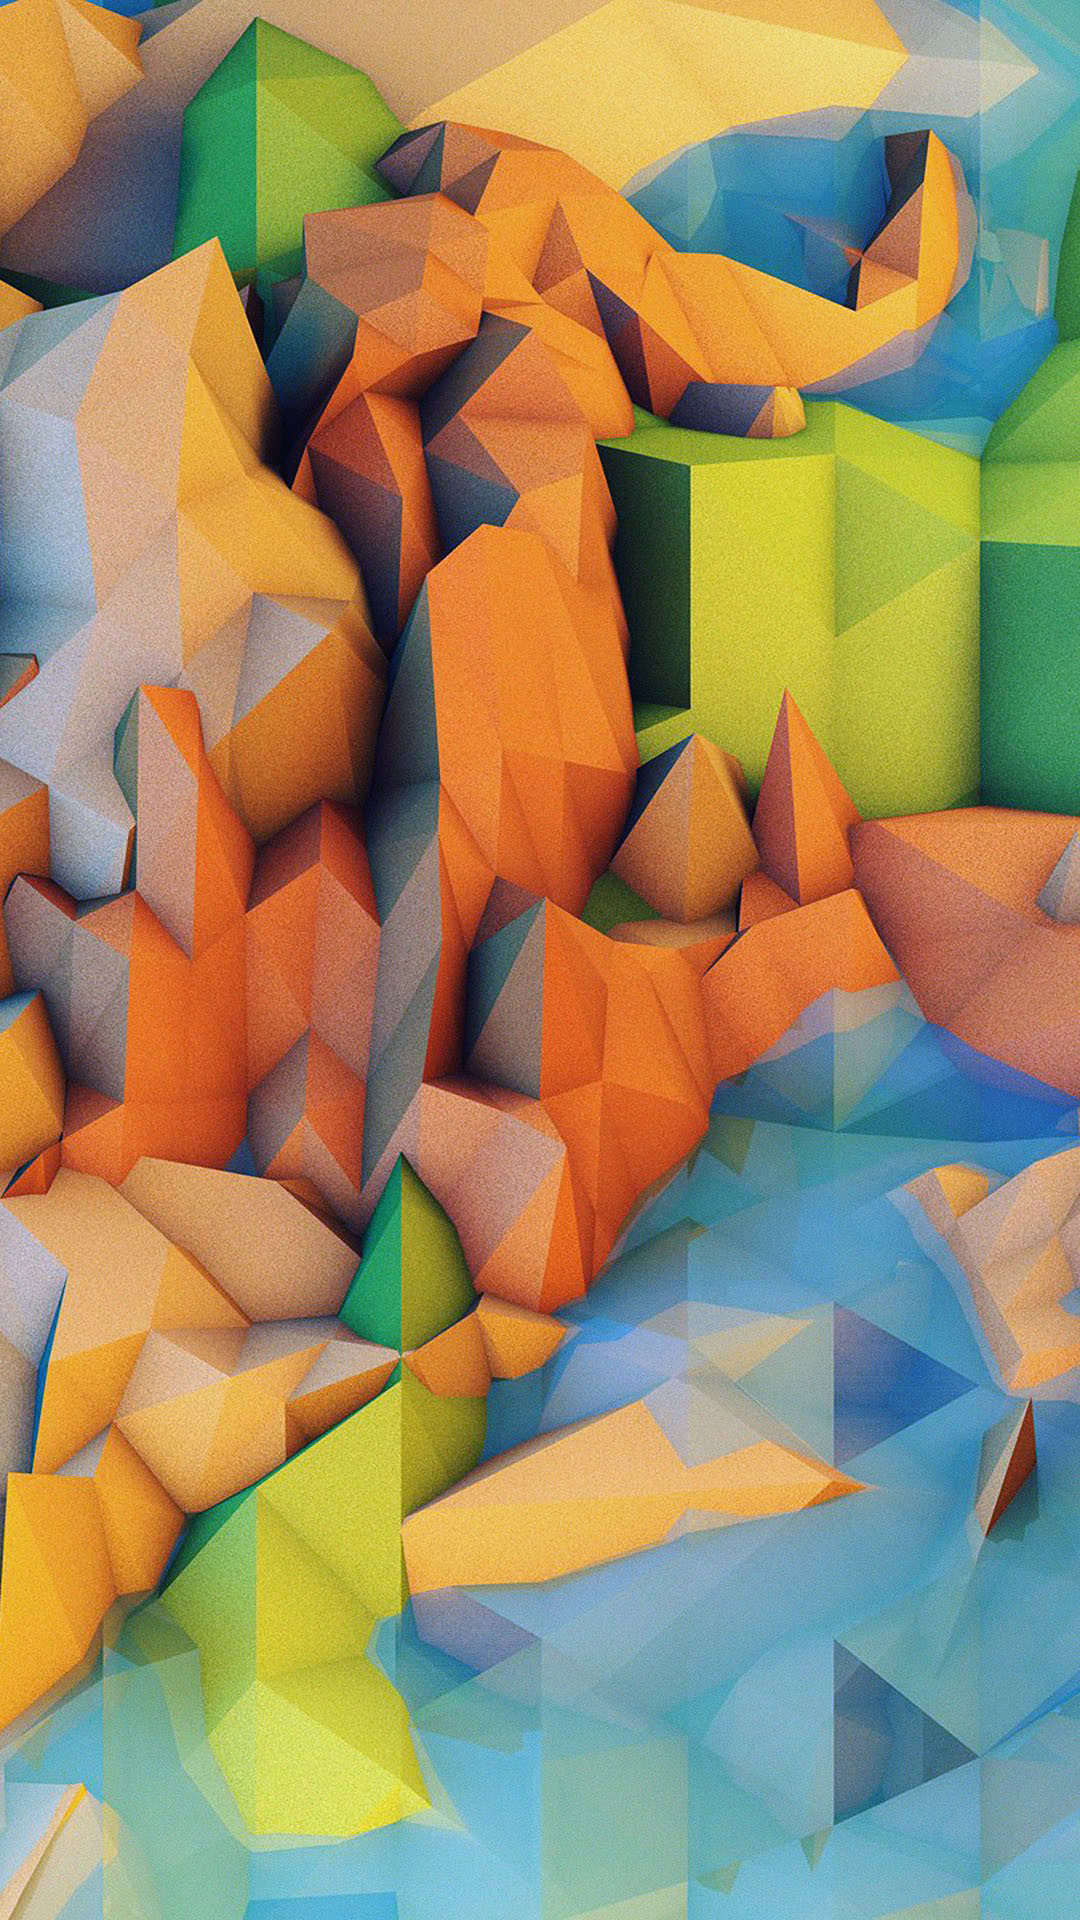 1080x1920 Low Poly Mountains CGI Android Wallpaper ...